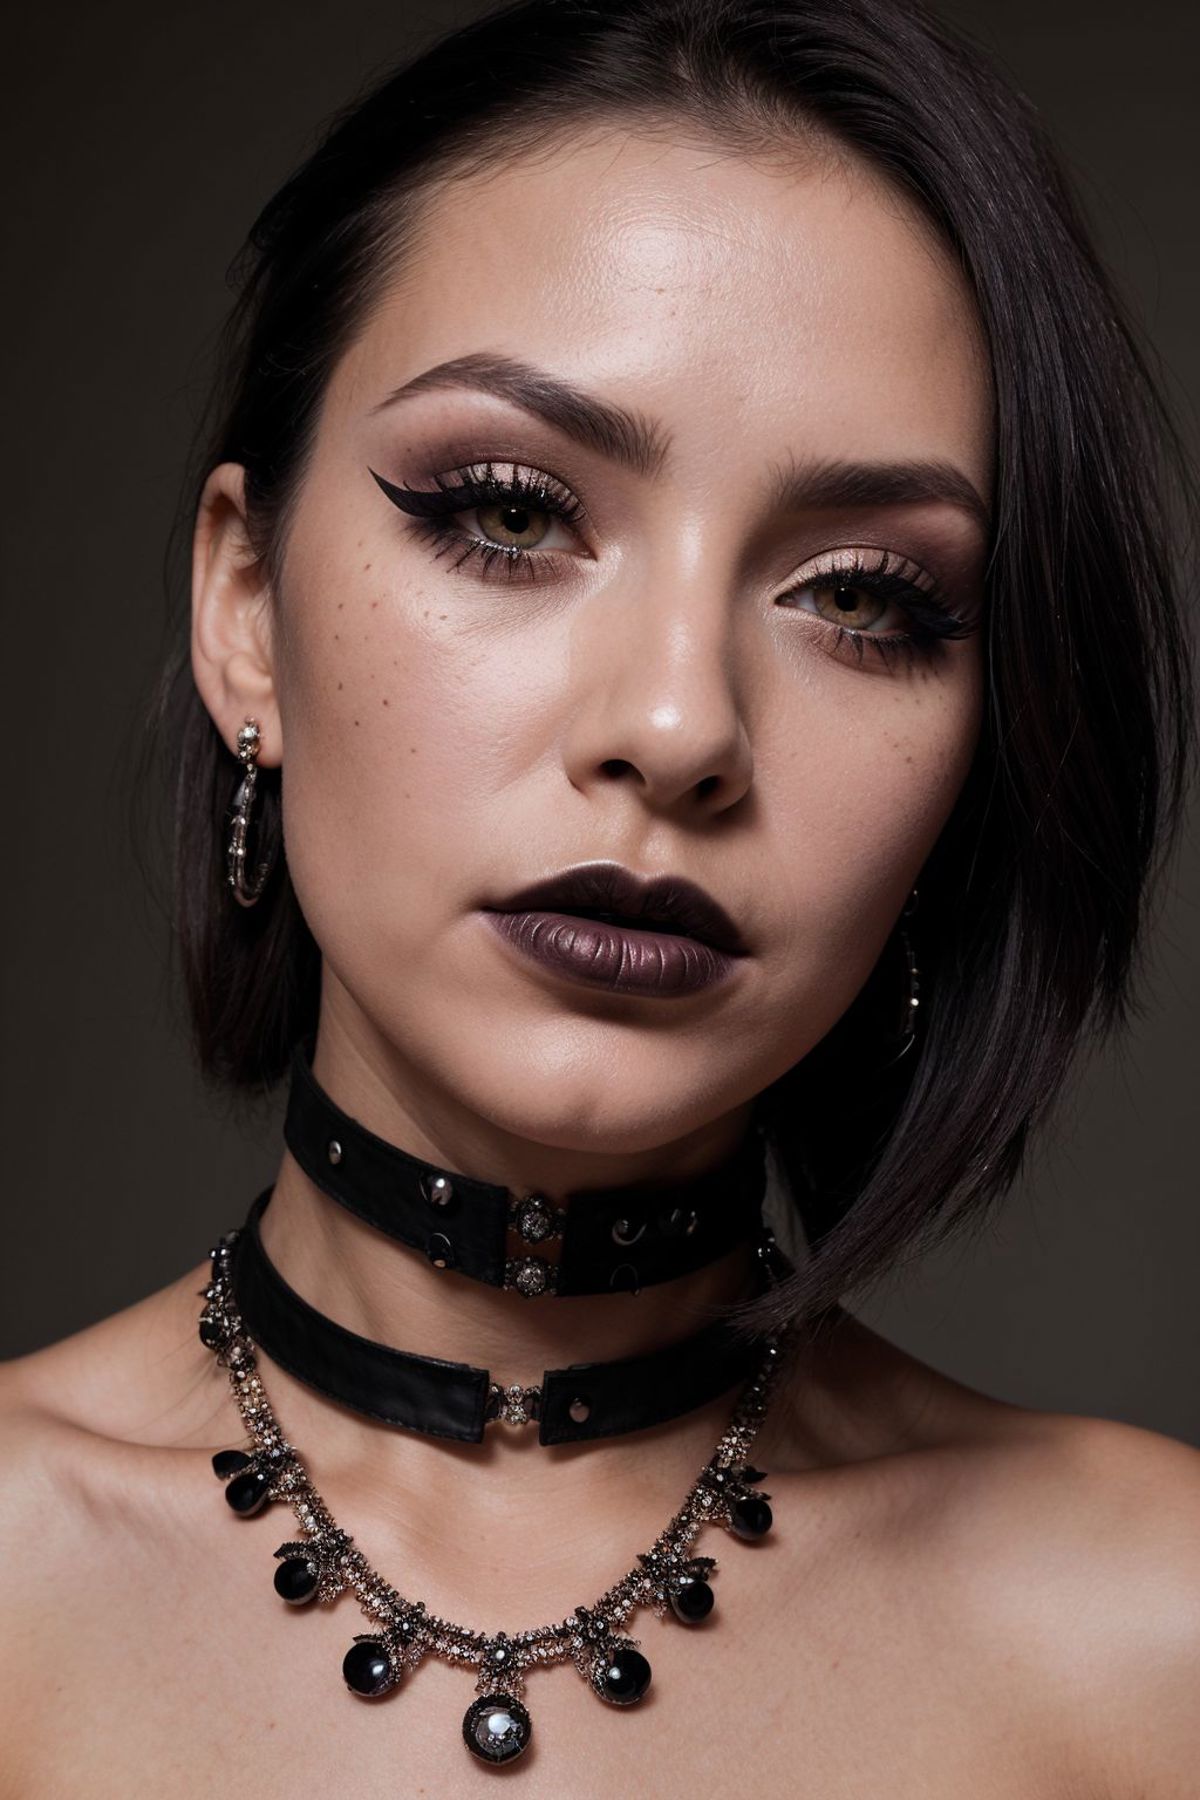 The image features a woman with dark hair and a black choker necklace. She is wearing a black leather choker and has a black lipstick on her lips. The woman is looking at the camera, and her eyes are open wide. The scene appears to be set against a dark background, which adds to the dramatic and mysterious atmosphere.